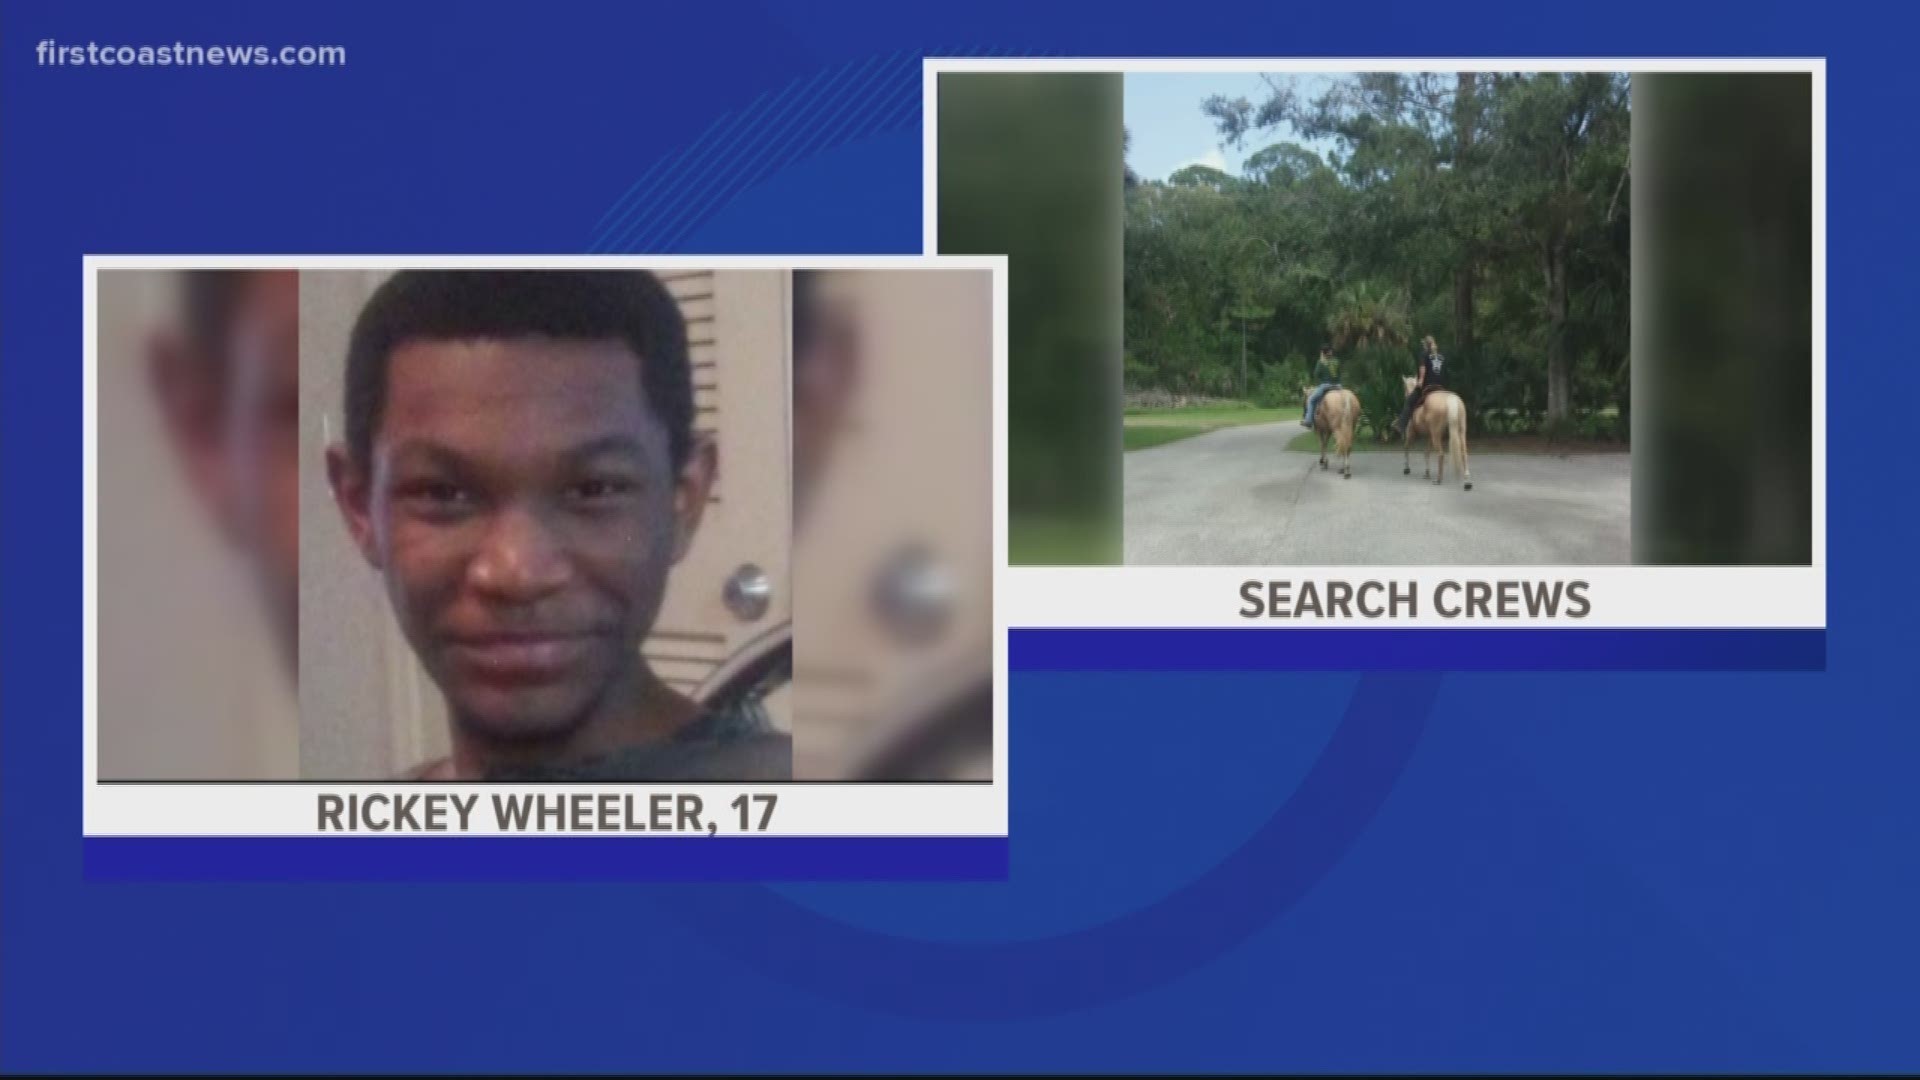 Rickey Wheeler, 17, was missing for five days before Flagler County deputies found him in a wooded area. He was taken to a hospital and is in stable condition.